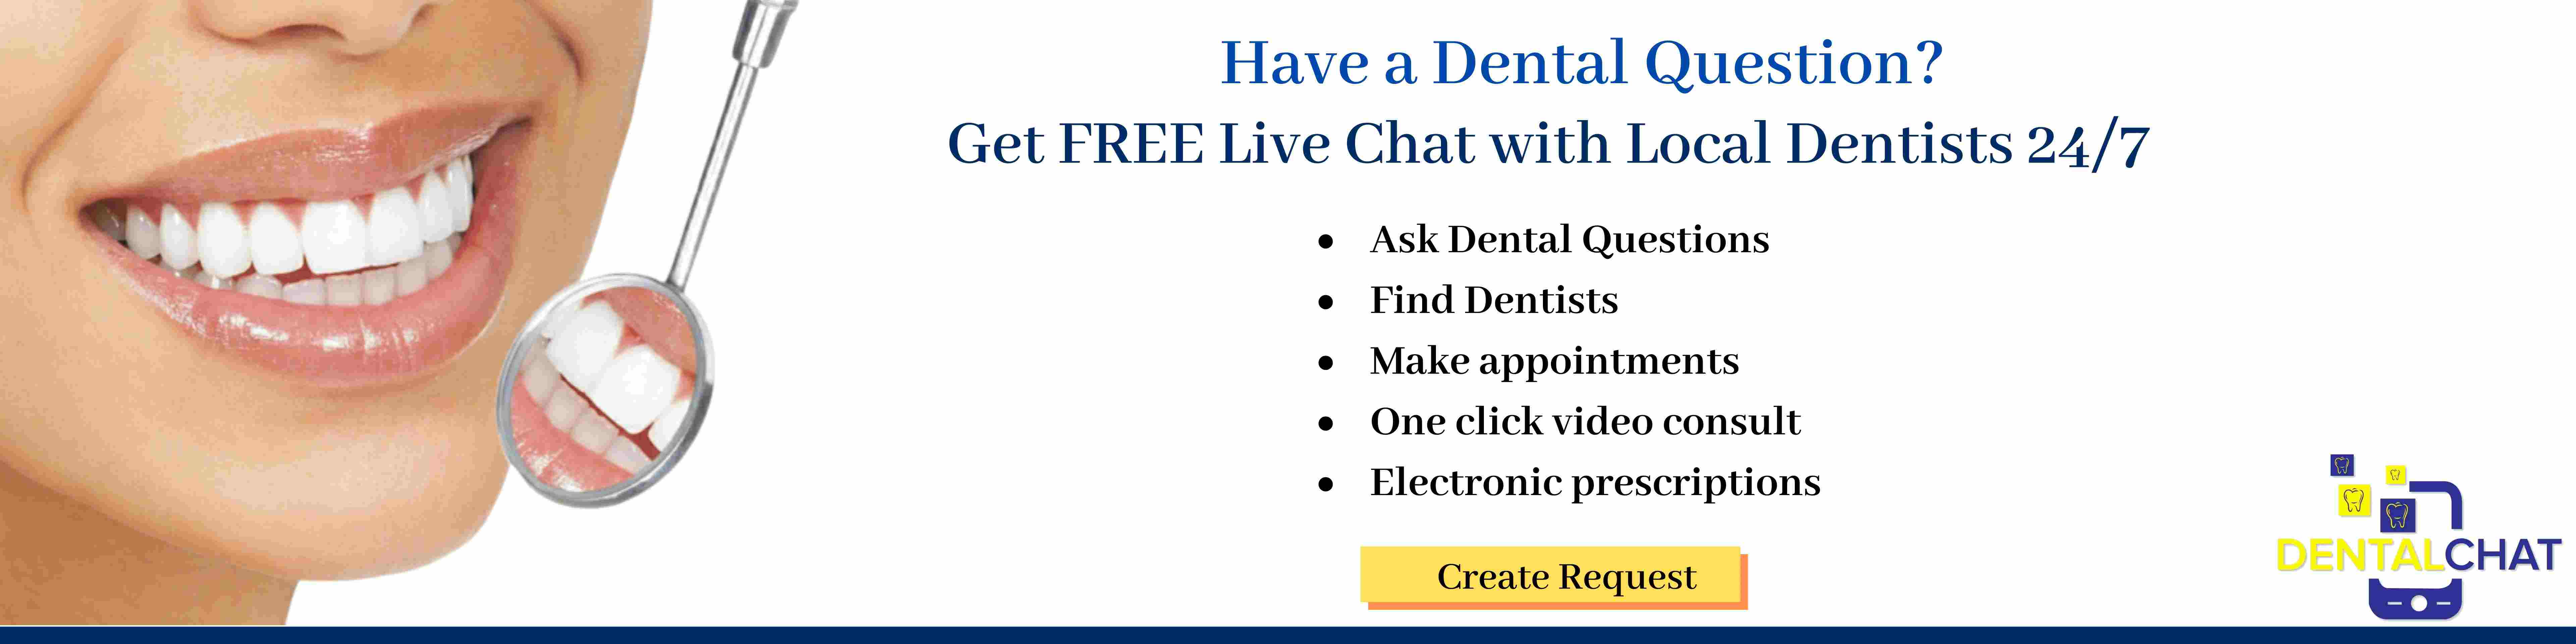 Online Dentists Question Chat Blogging, Online Cosmetic Dentistry Questions Blog